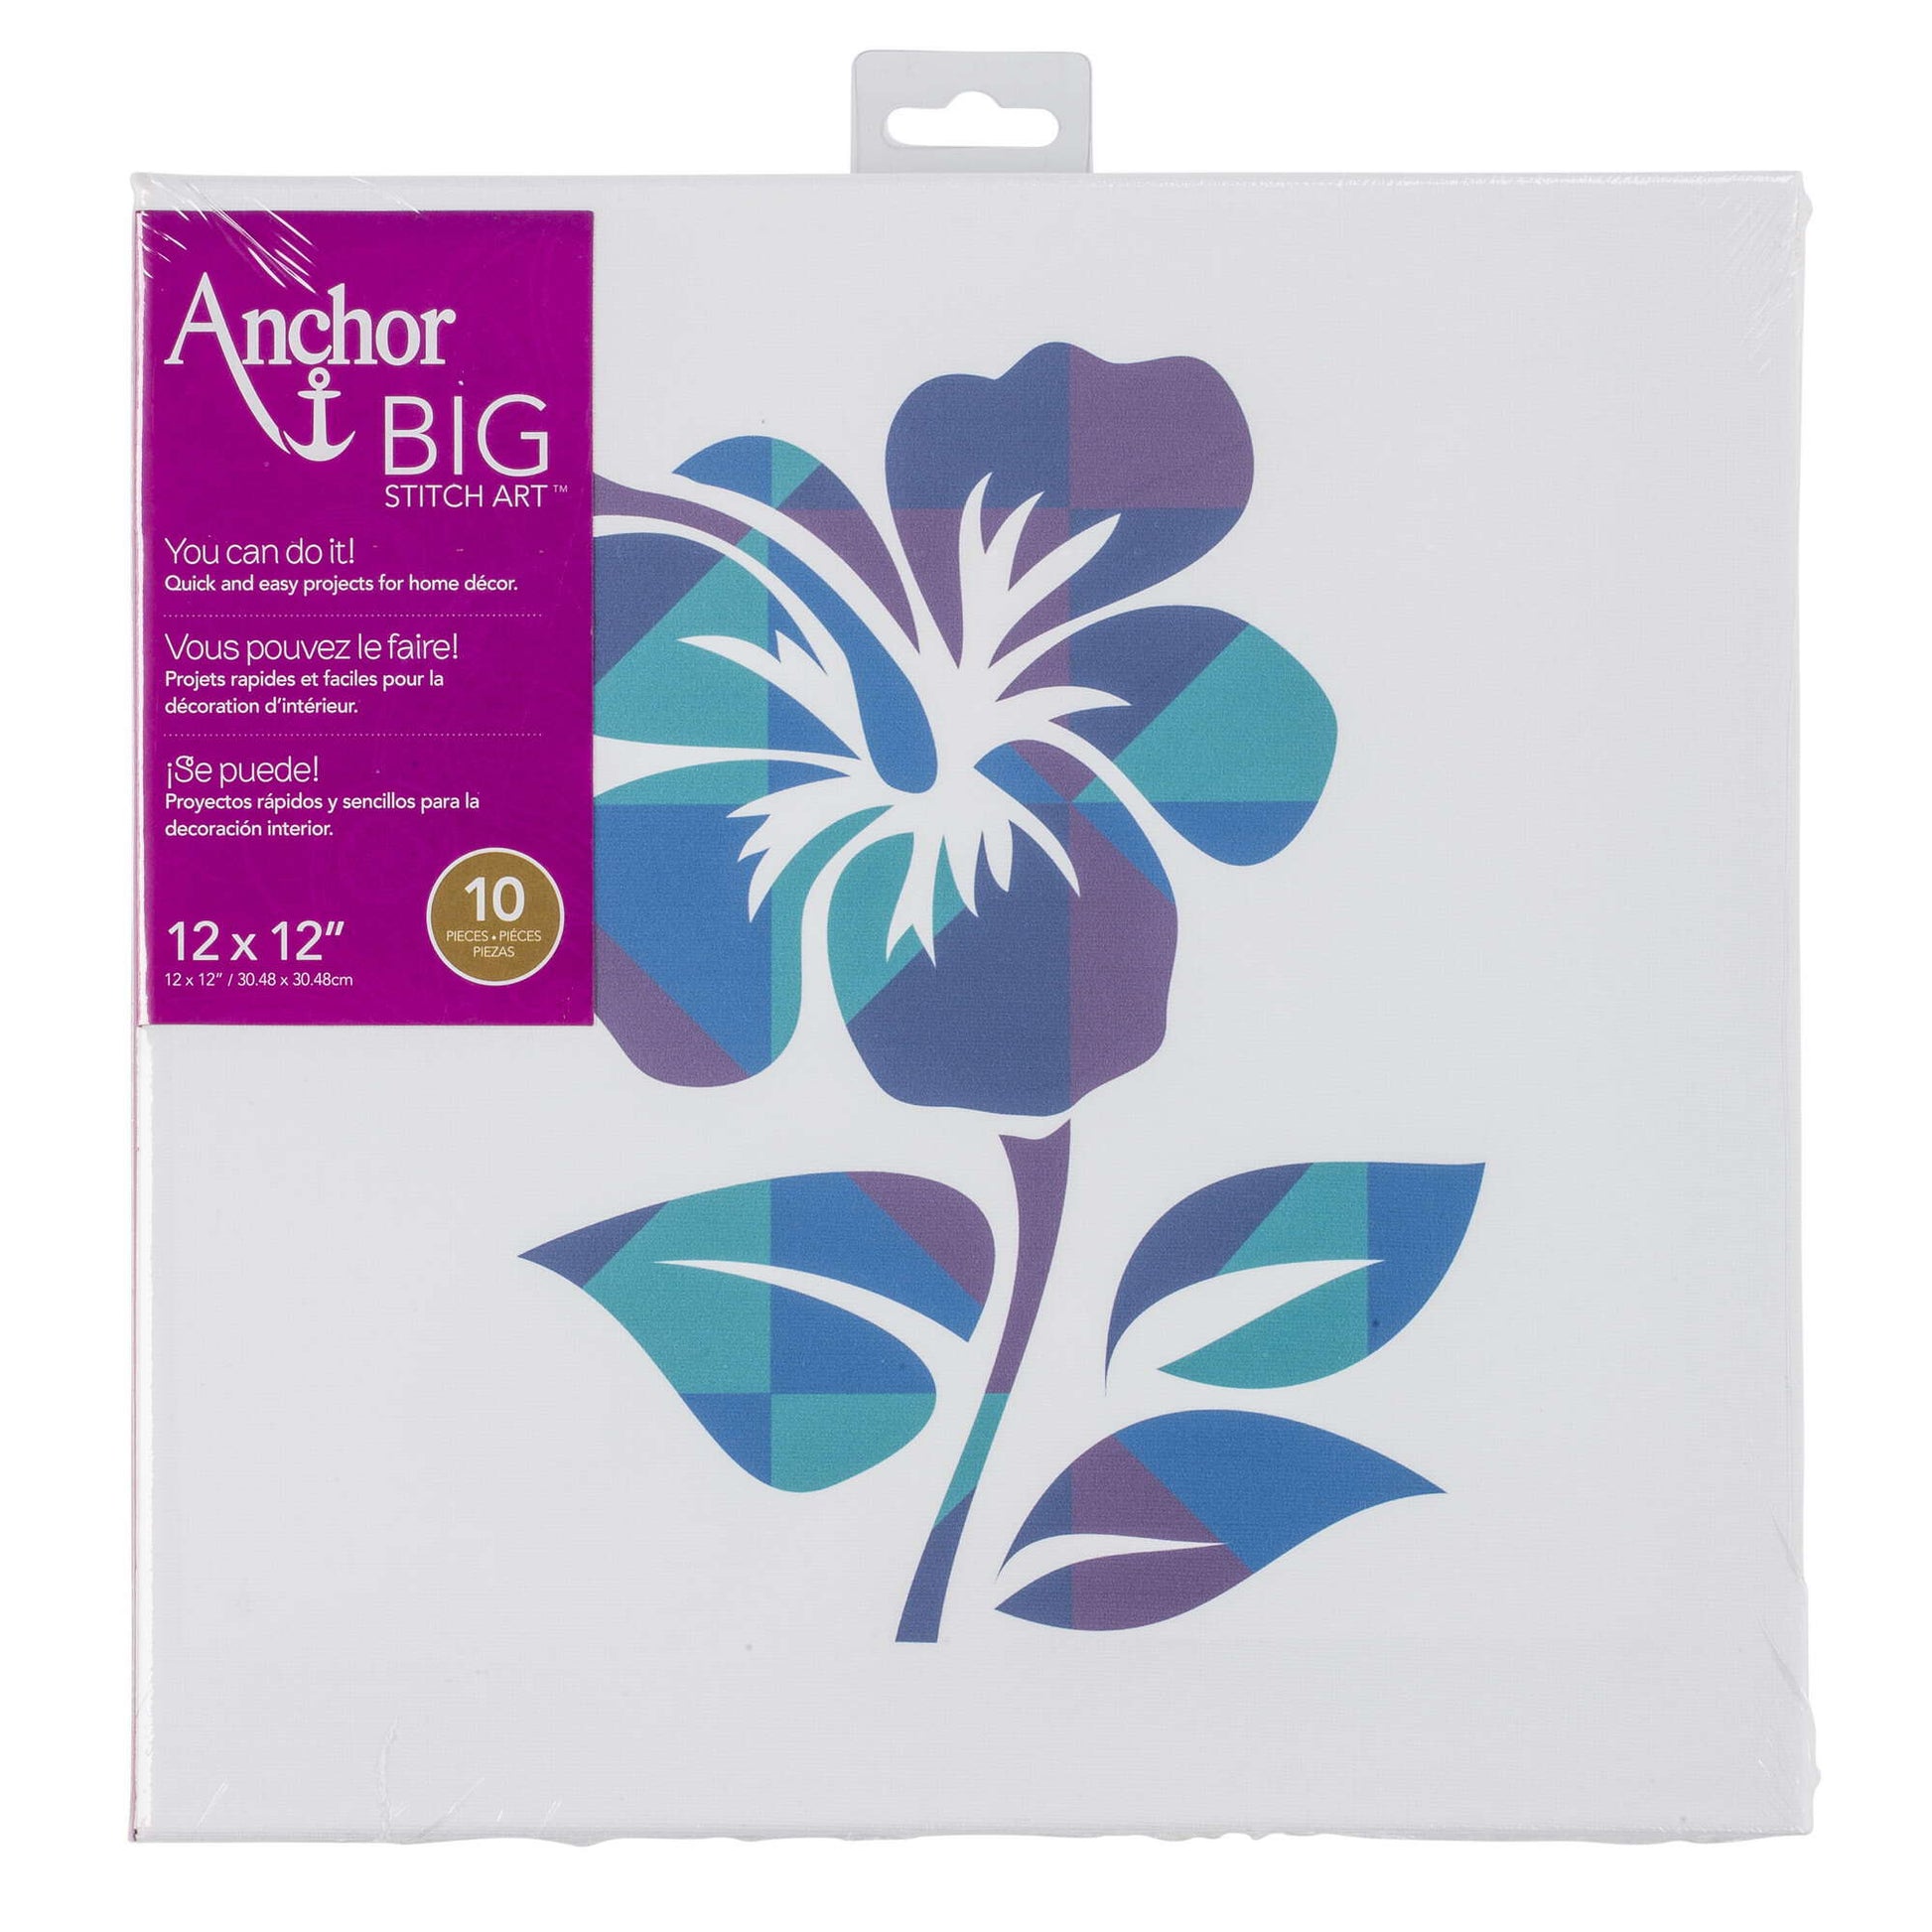 Anchor Big Stitch Art 12" x 12" - Clearance Items Hibiscus